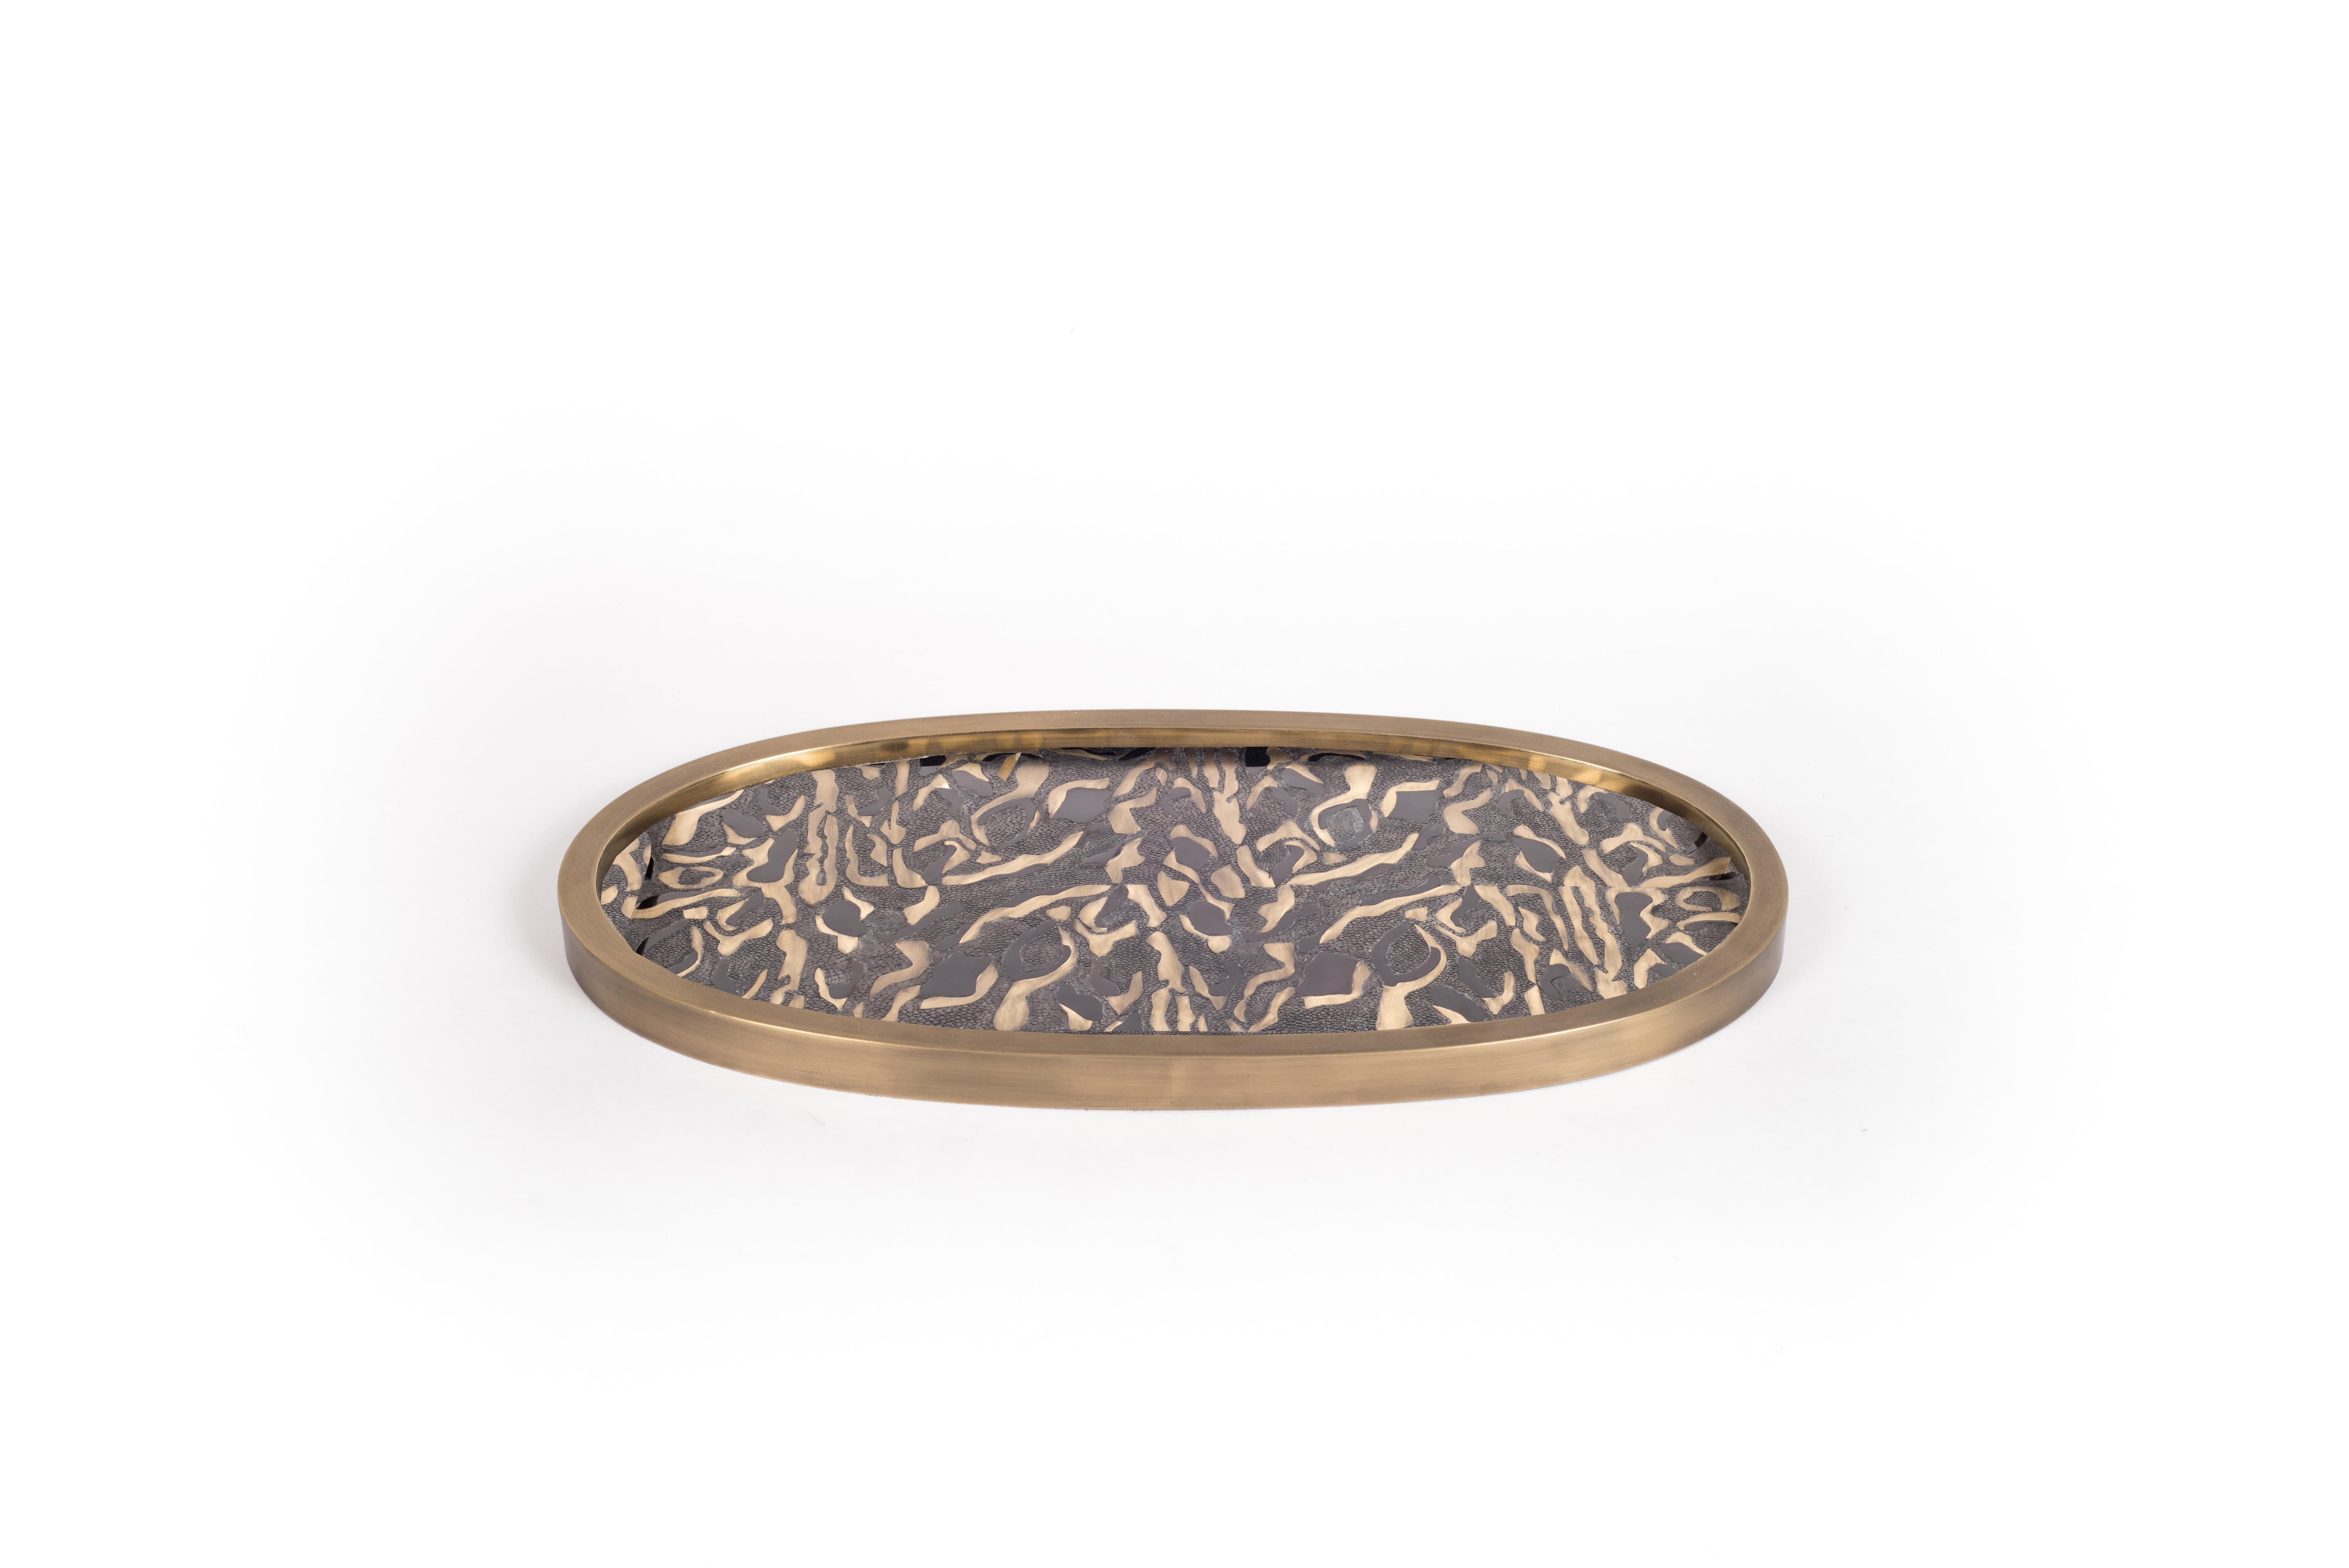 Art Deco Shagreen Tray with Mix Inlay Pattern Including Shell and Brass by Kifu, Paris